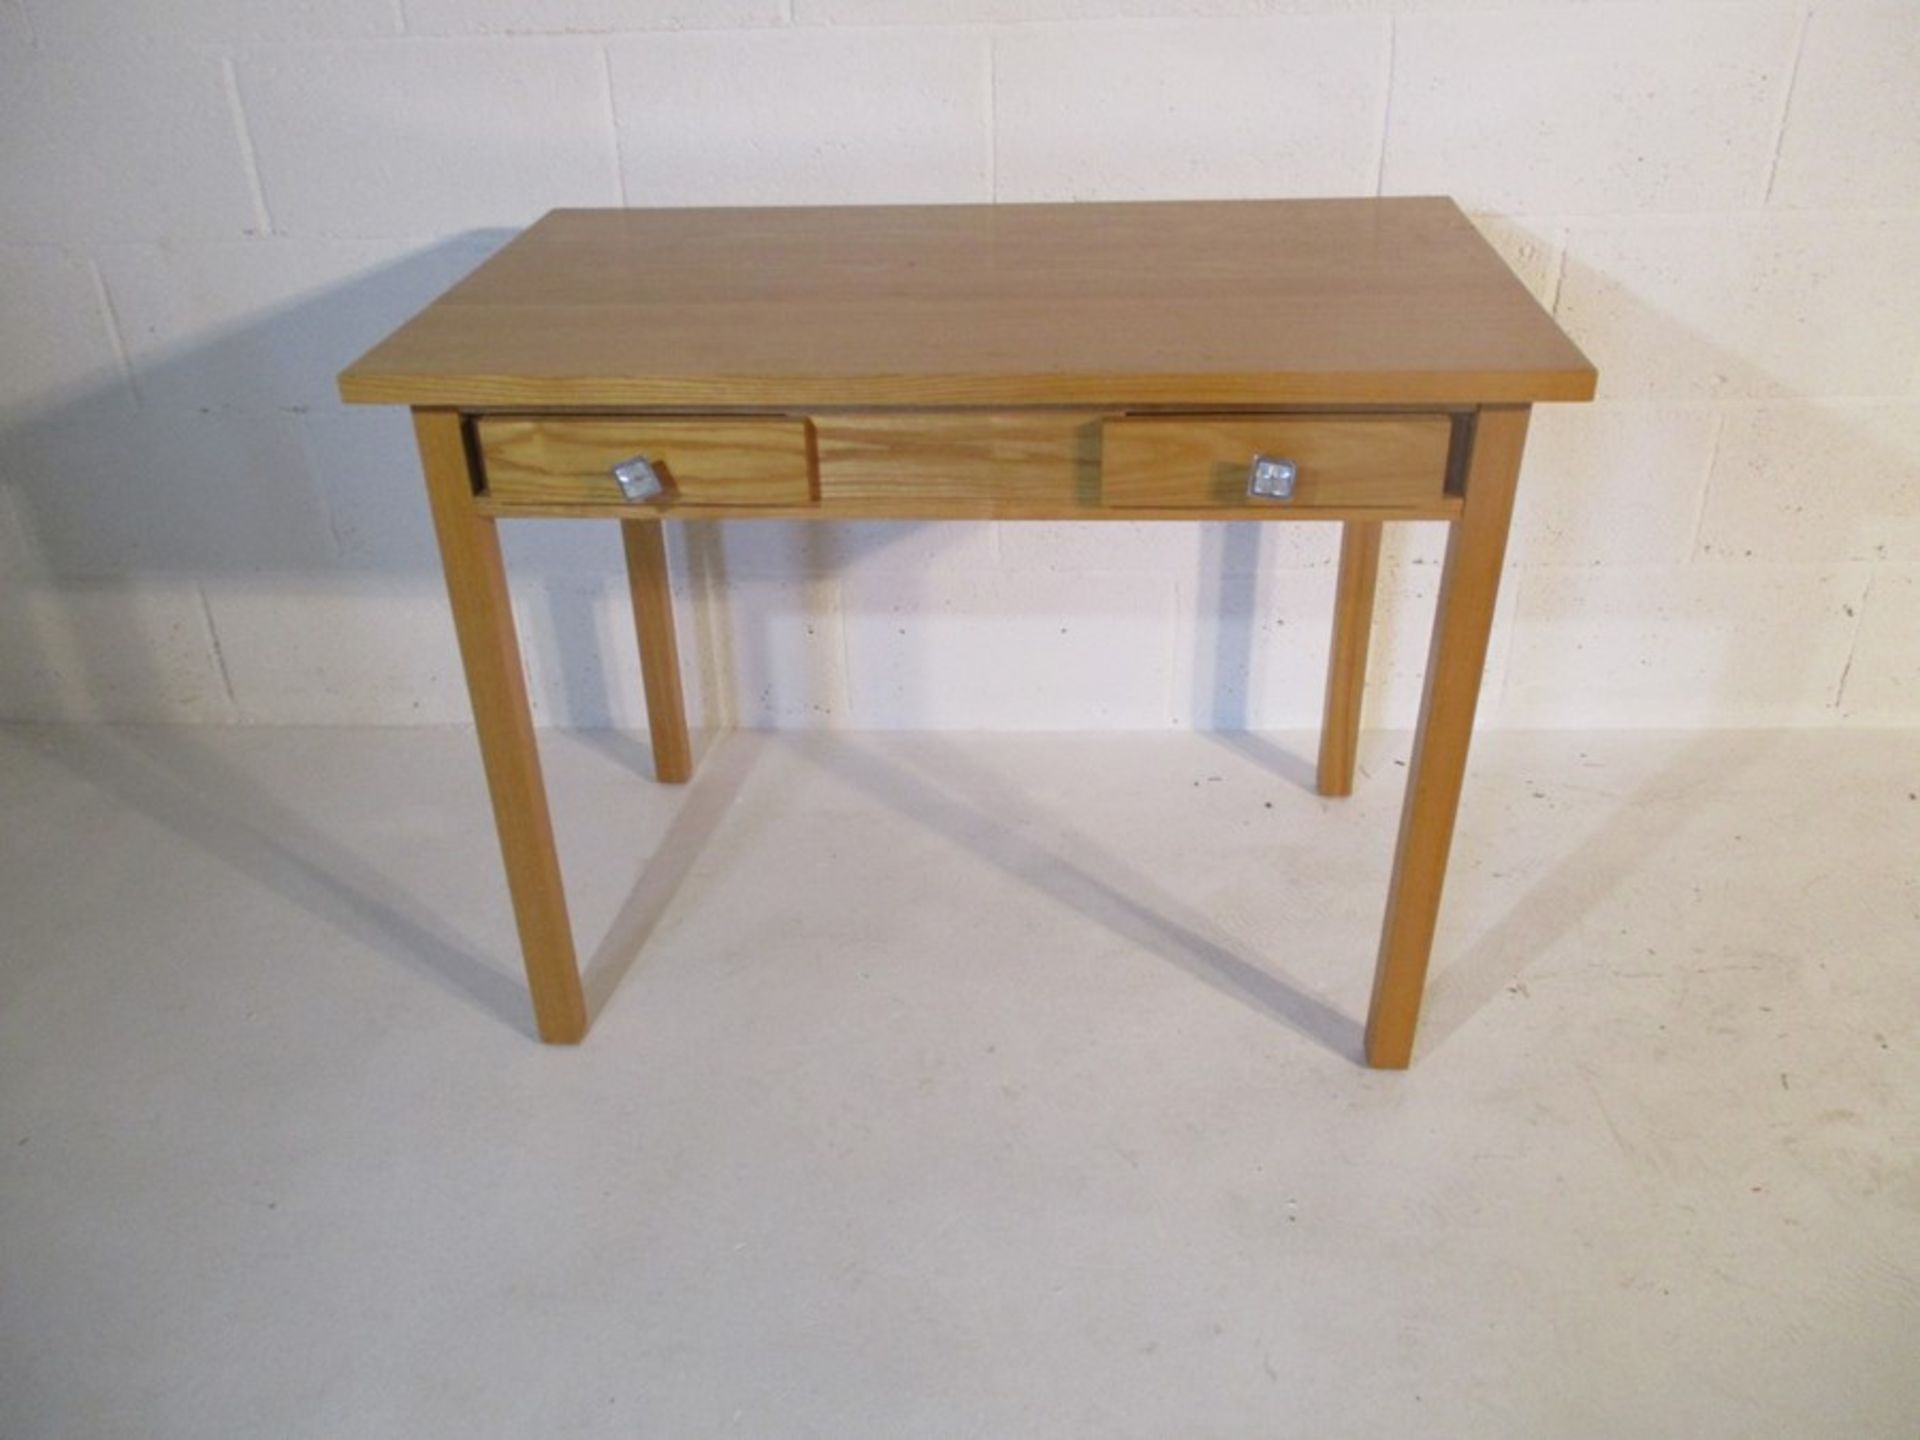 A modern light oak table with two small drawers